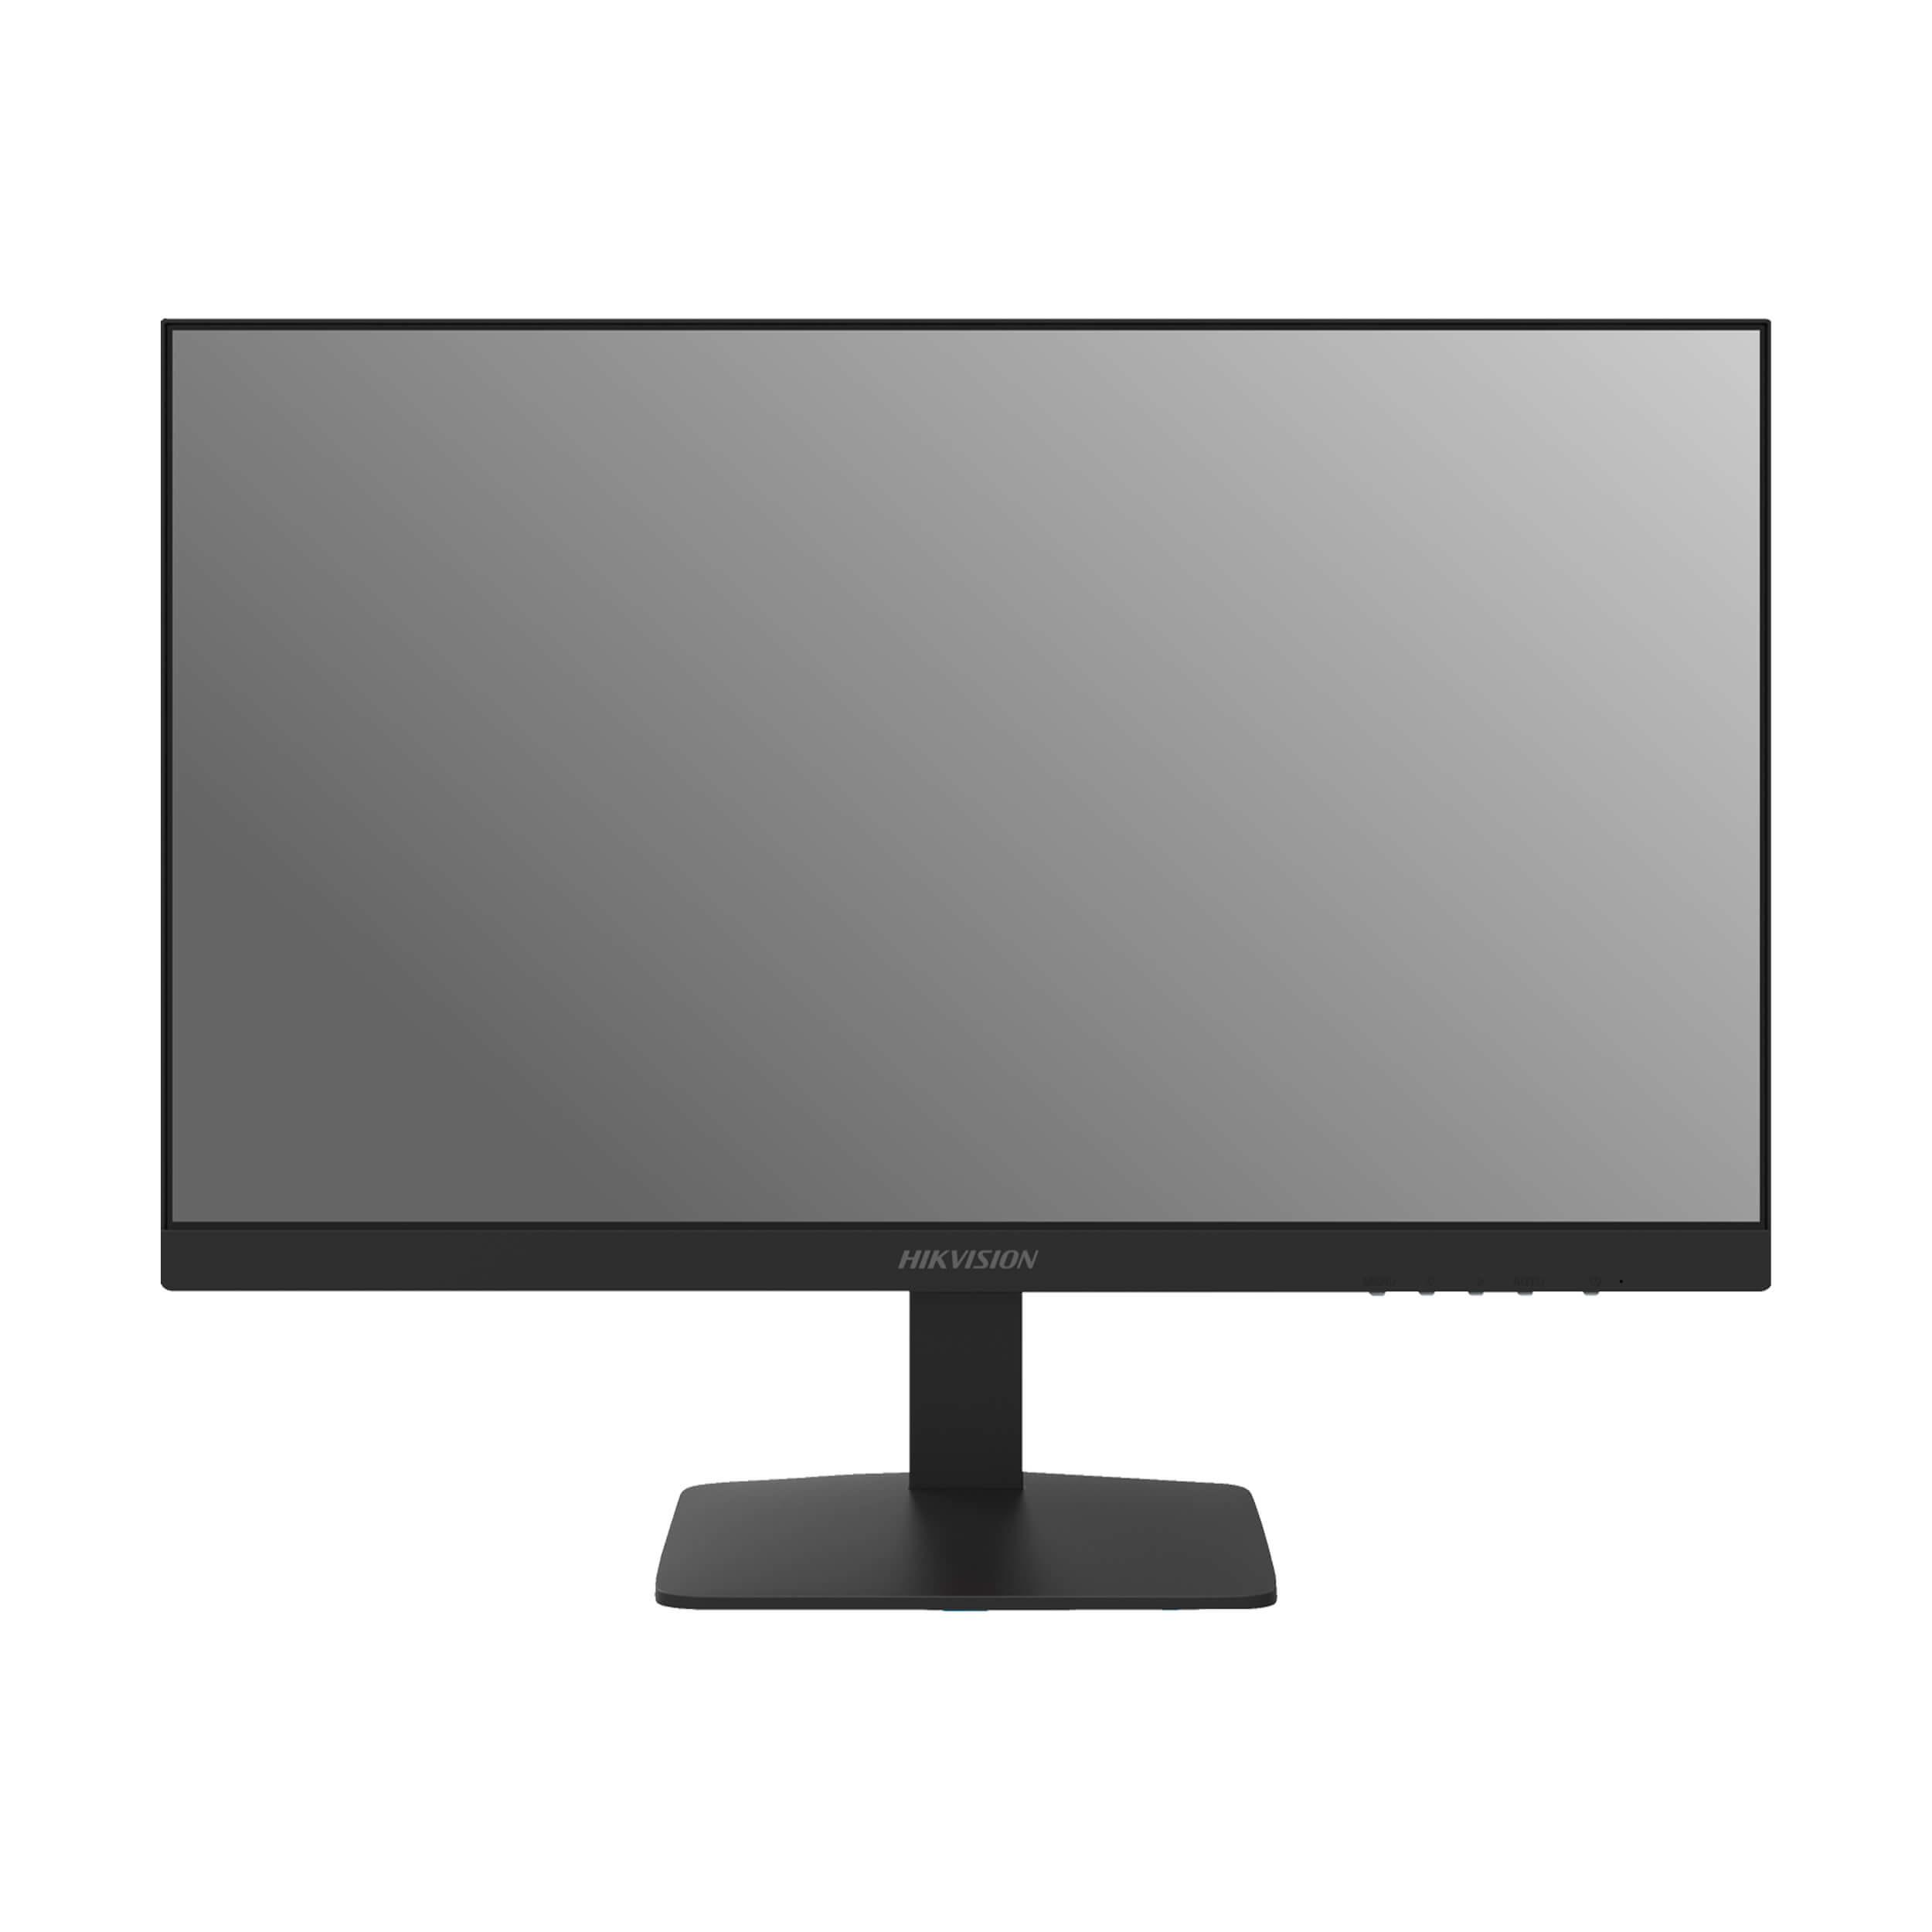 DS-D5024FN - 23.8" LED Monitor